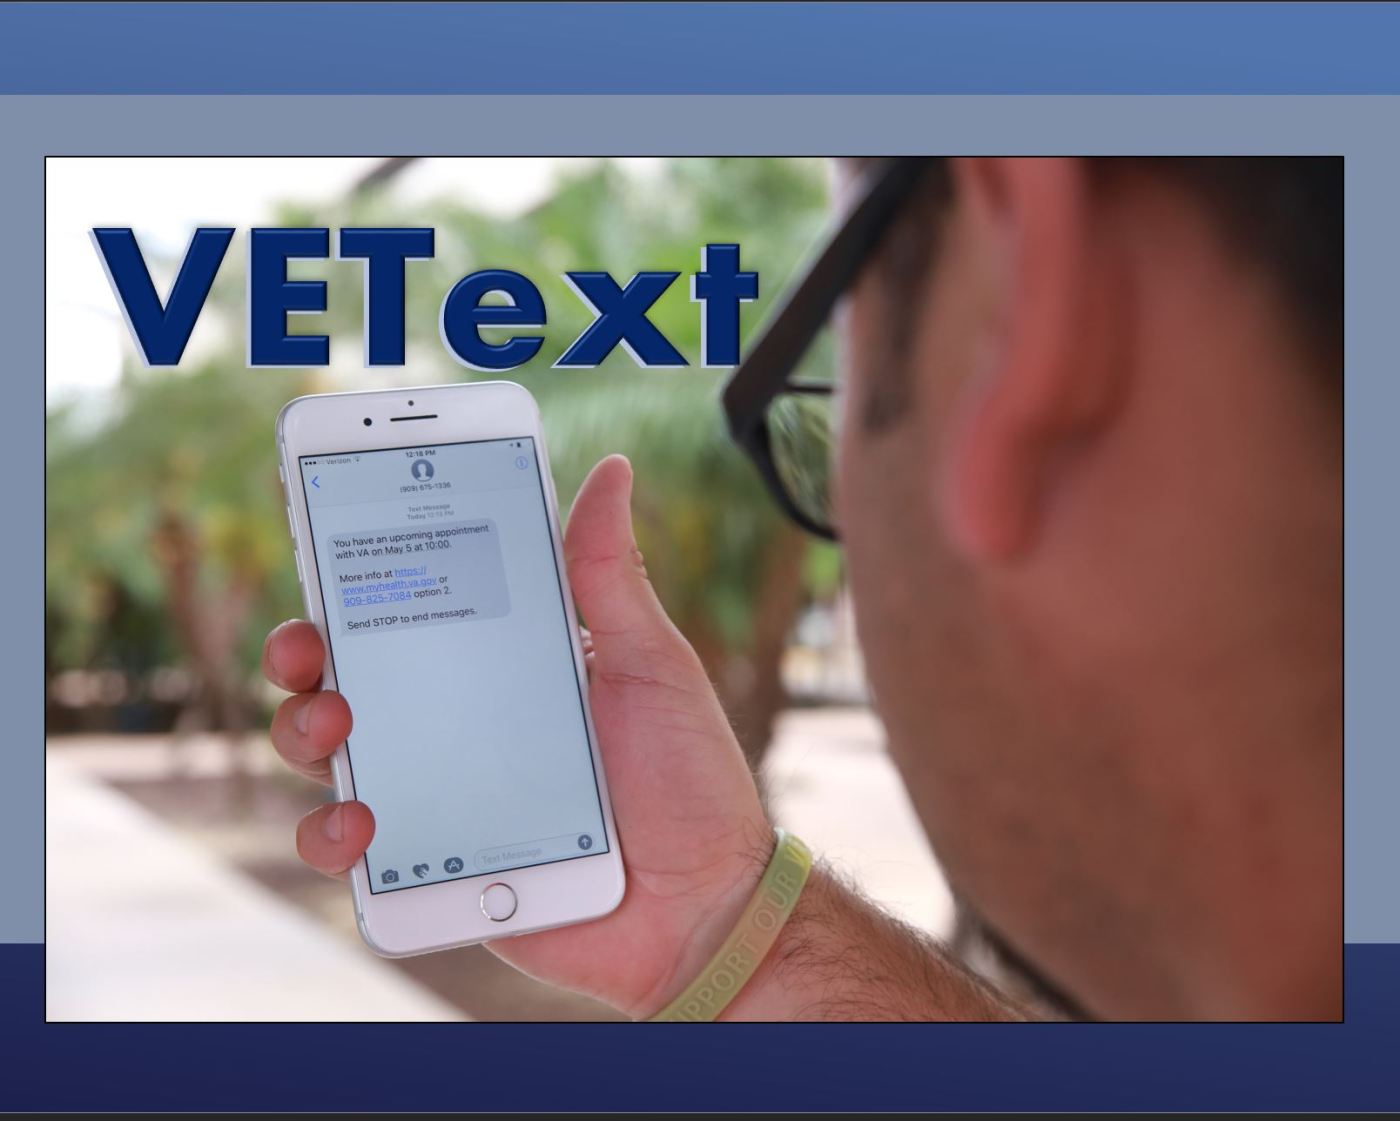 VEText is working for a Texas VA’s medical scheduling